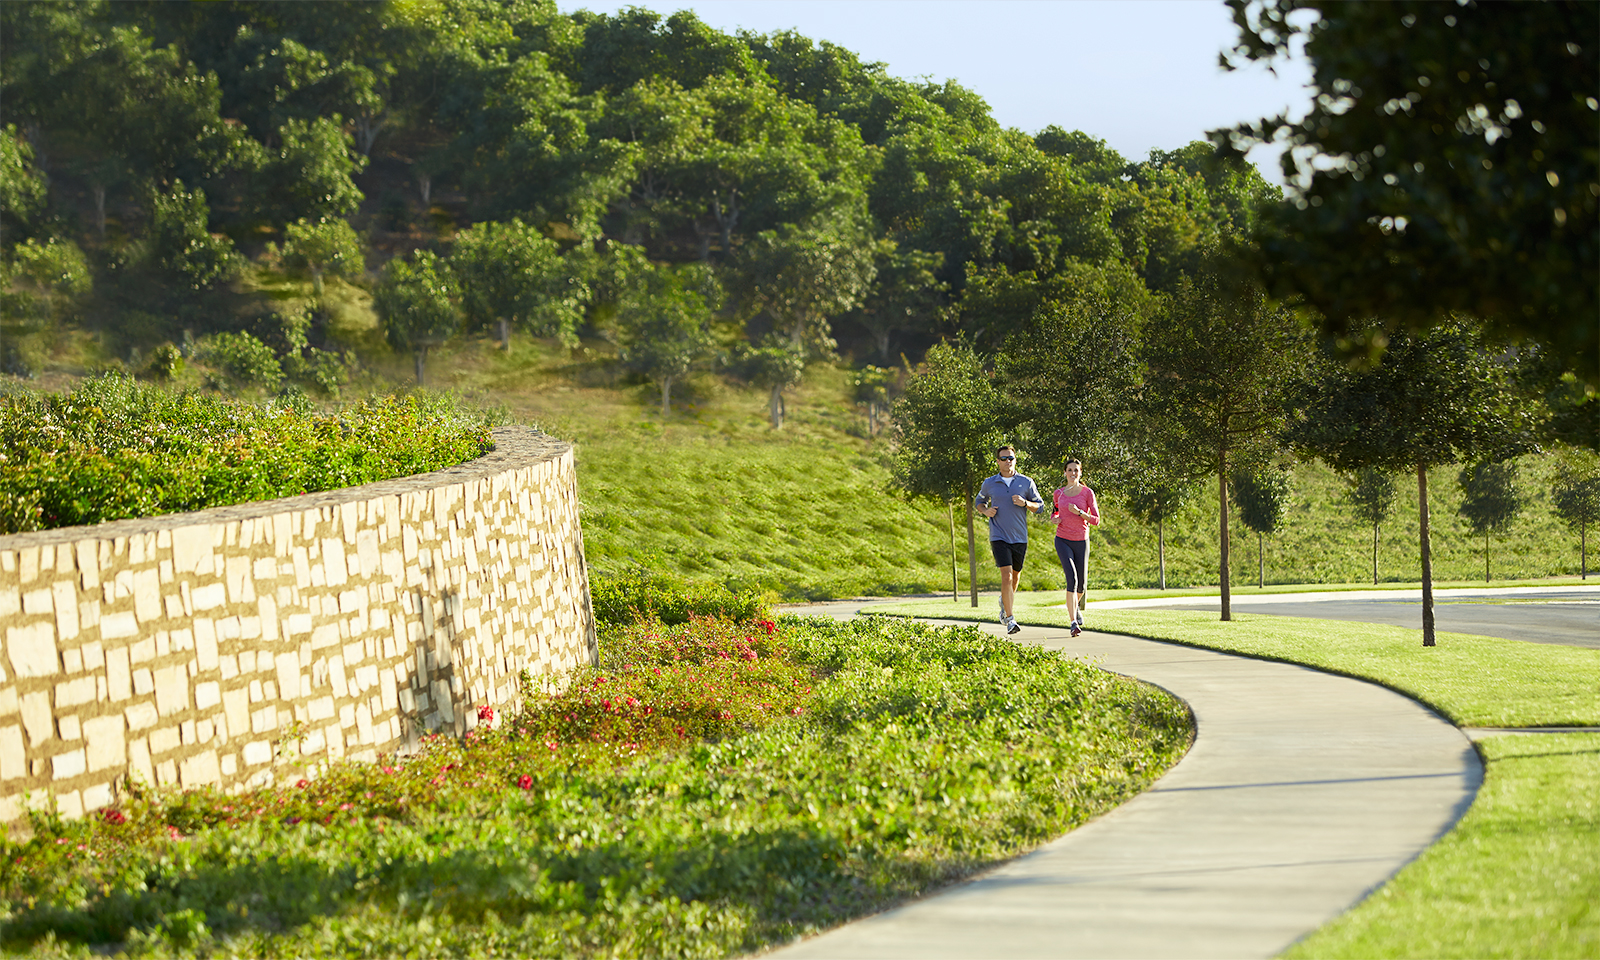 Irvine is one of America’s top 5 green cities